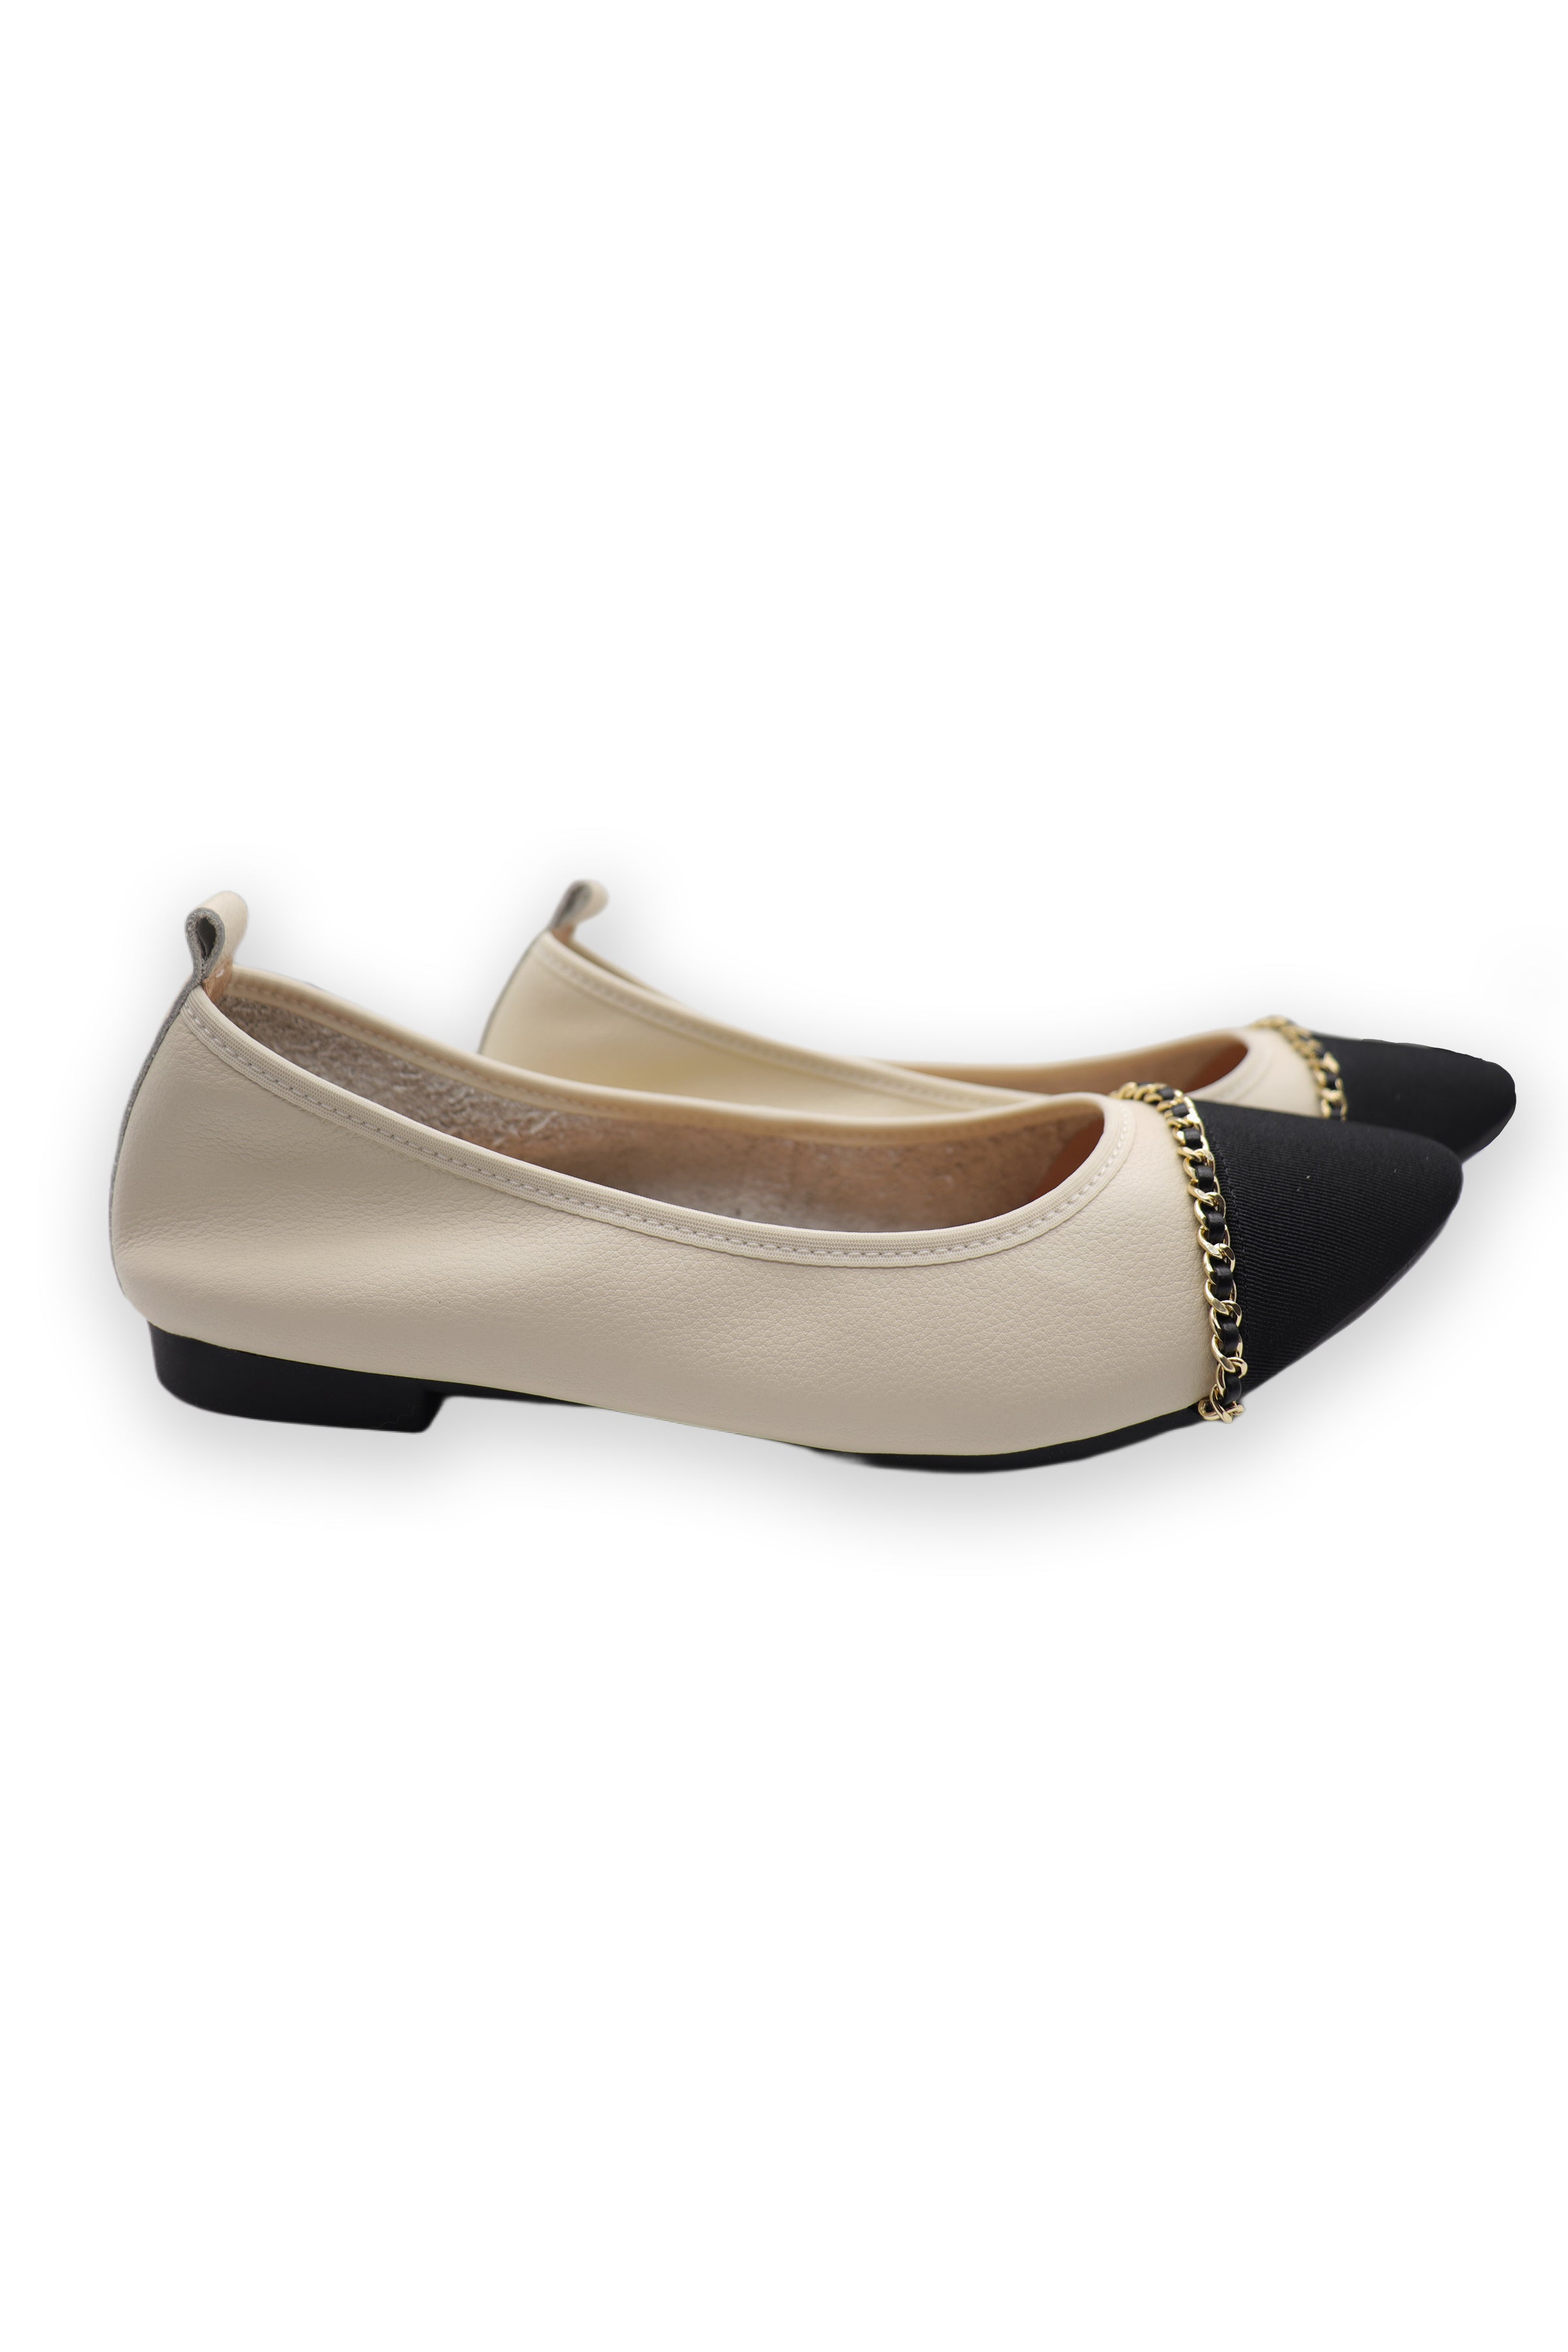 Salome White and Black Cowhide Leather Pointy Heels Flat Commuter Shoes